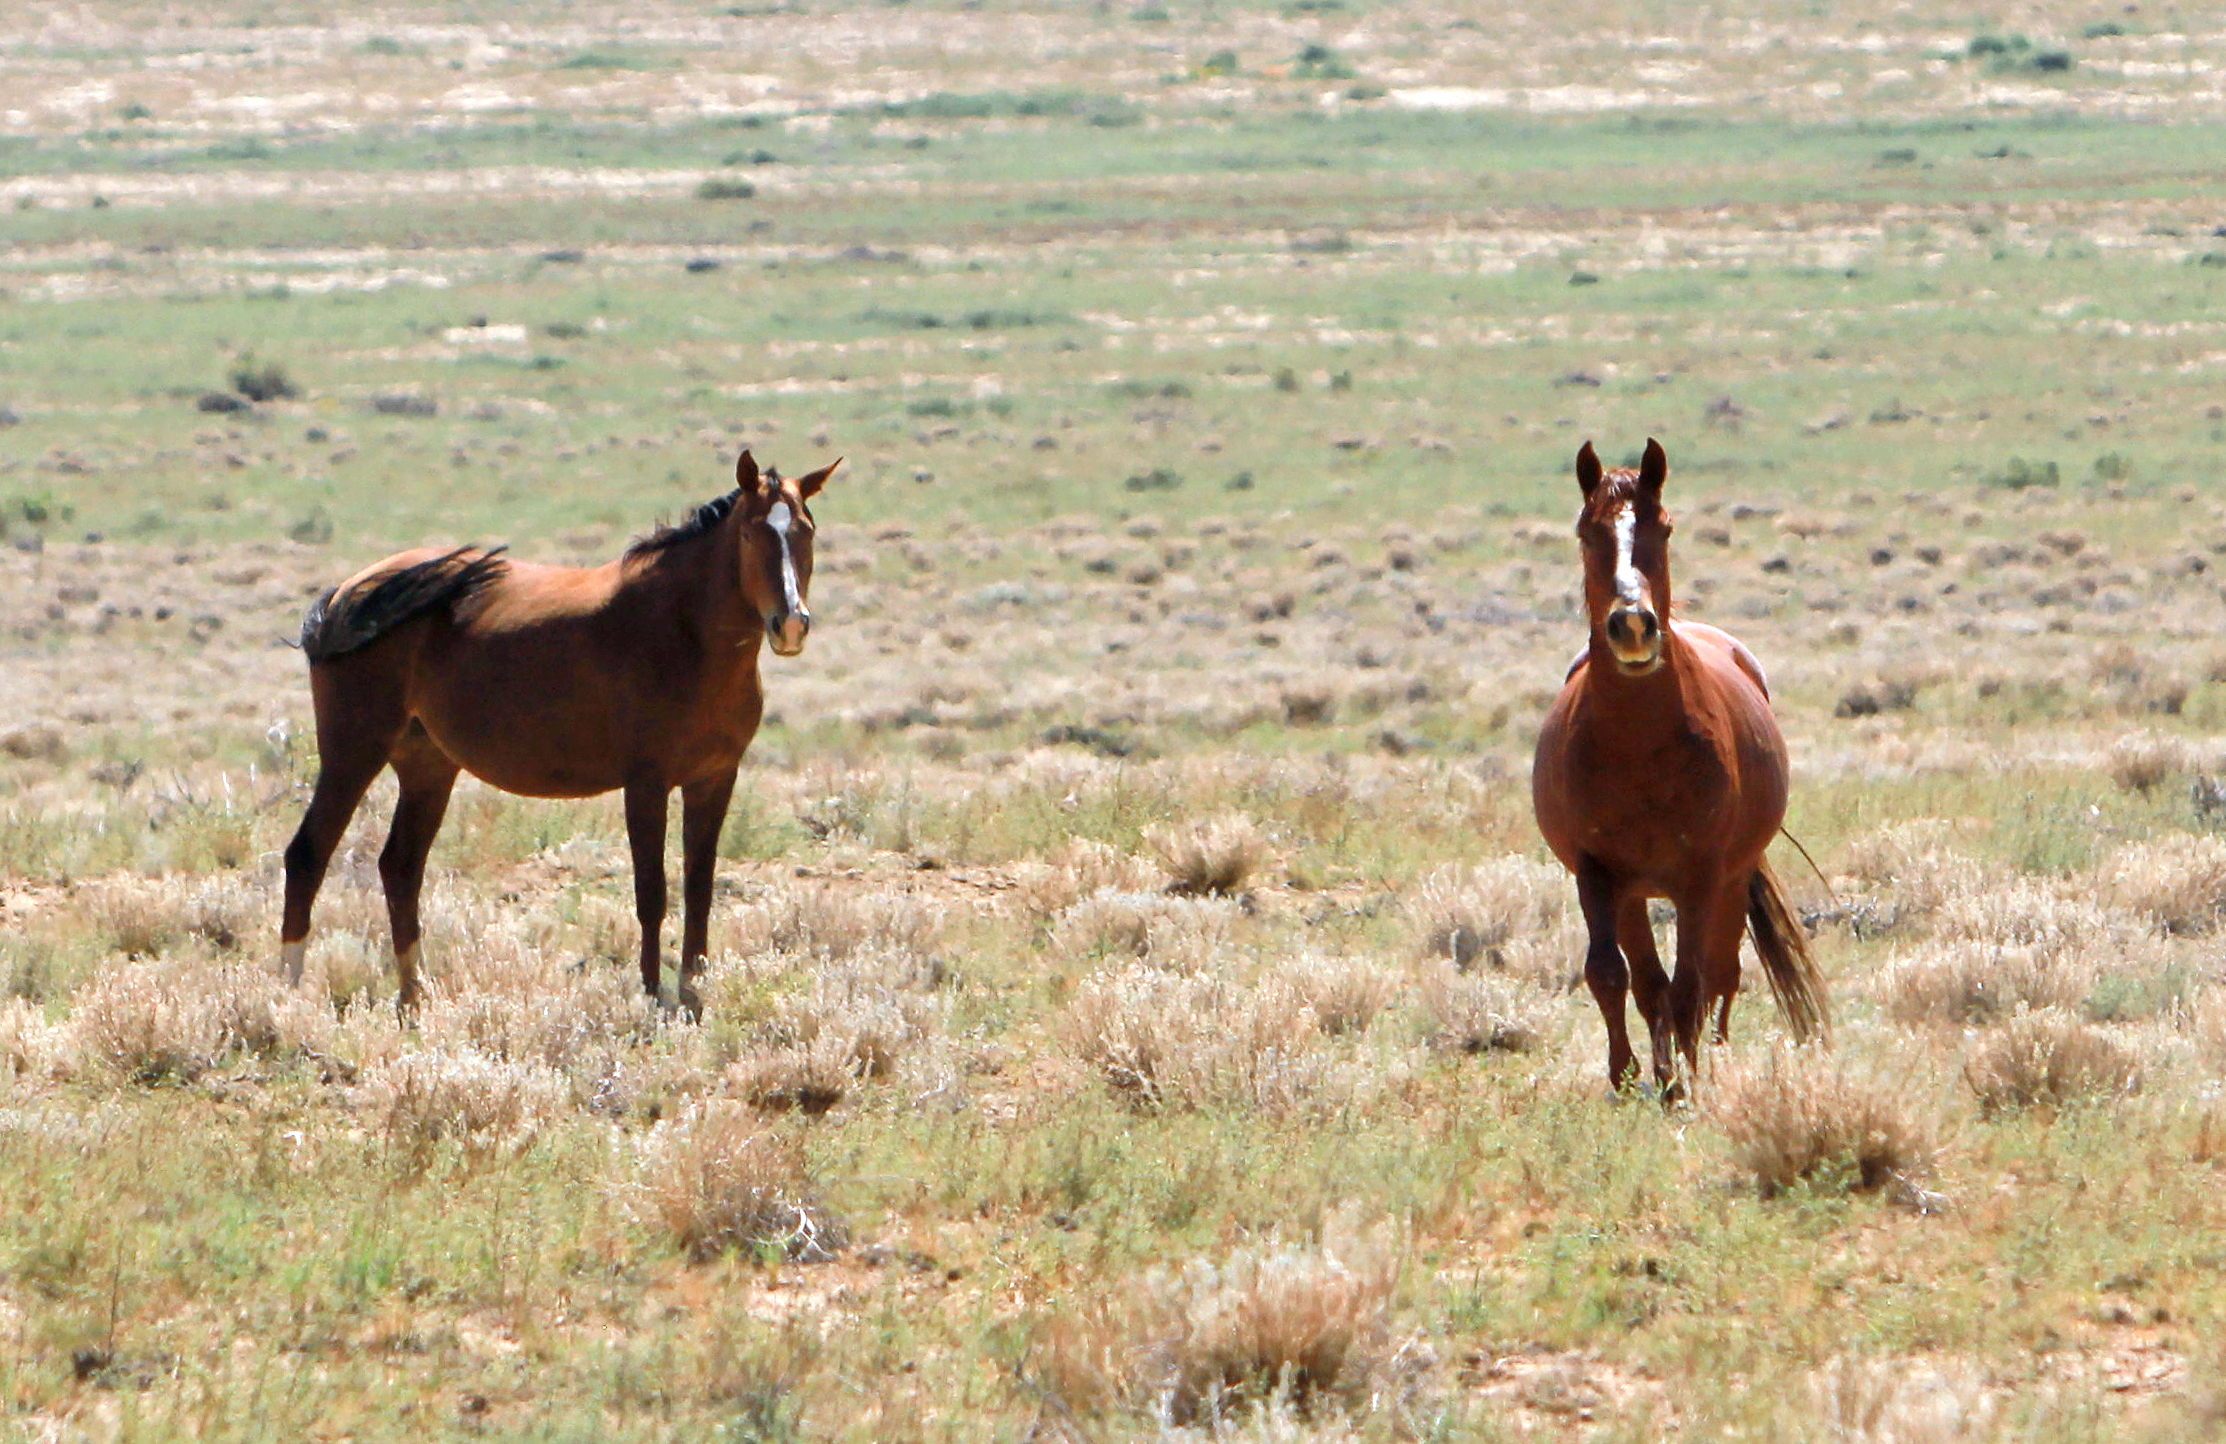 Augusta Liddic Ñ The Daily Times Feral horses are seen off of Indian Service Route 5091 on Friday, Sept. 6, 2013, in Shiprock. (Augusta Liddic/The Daily Times)